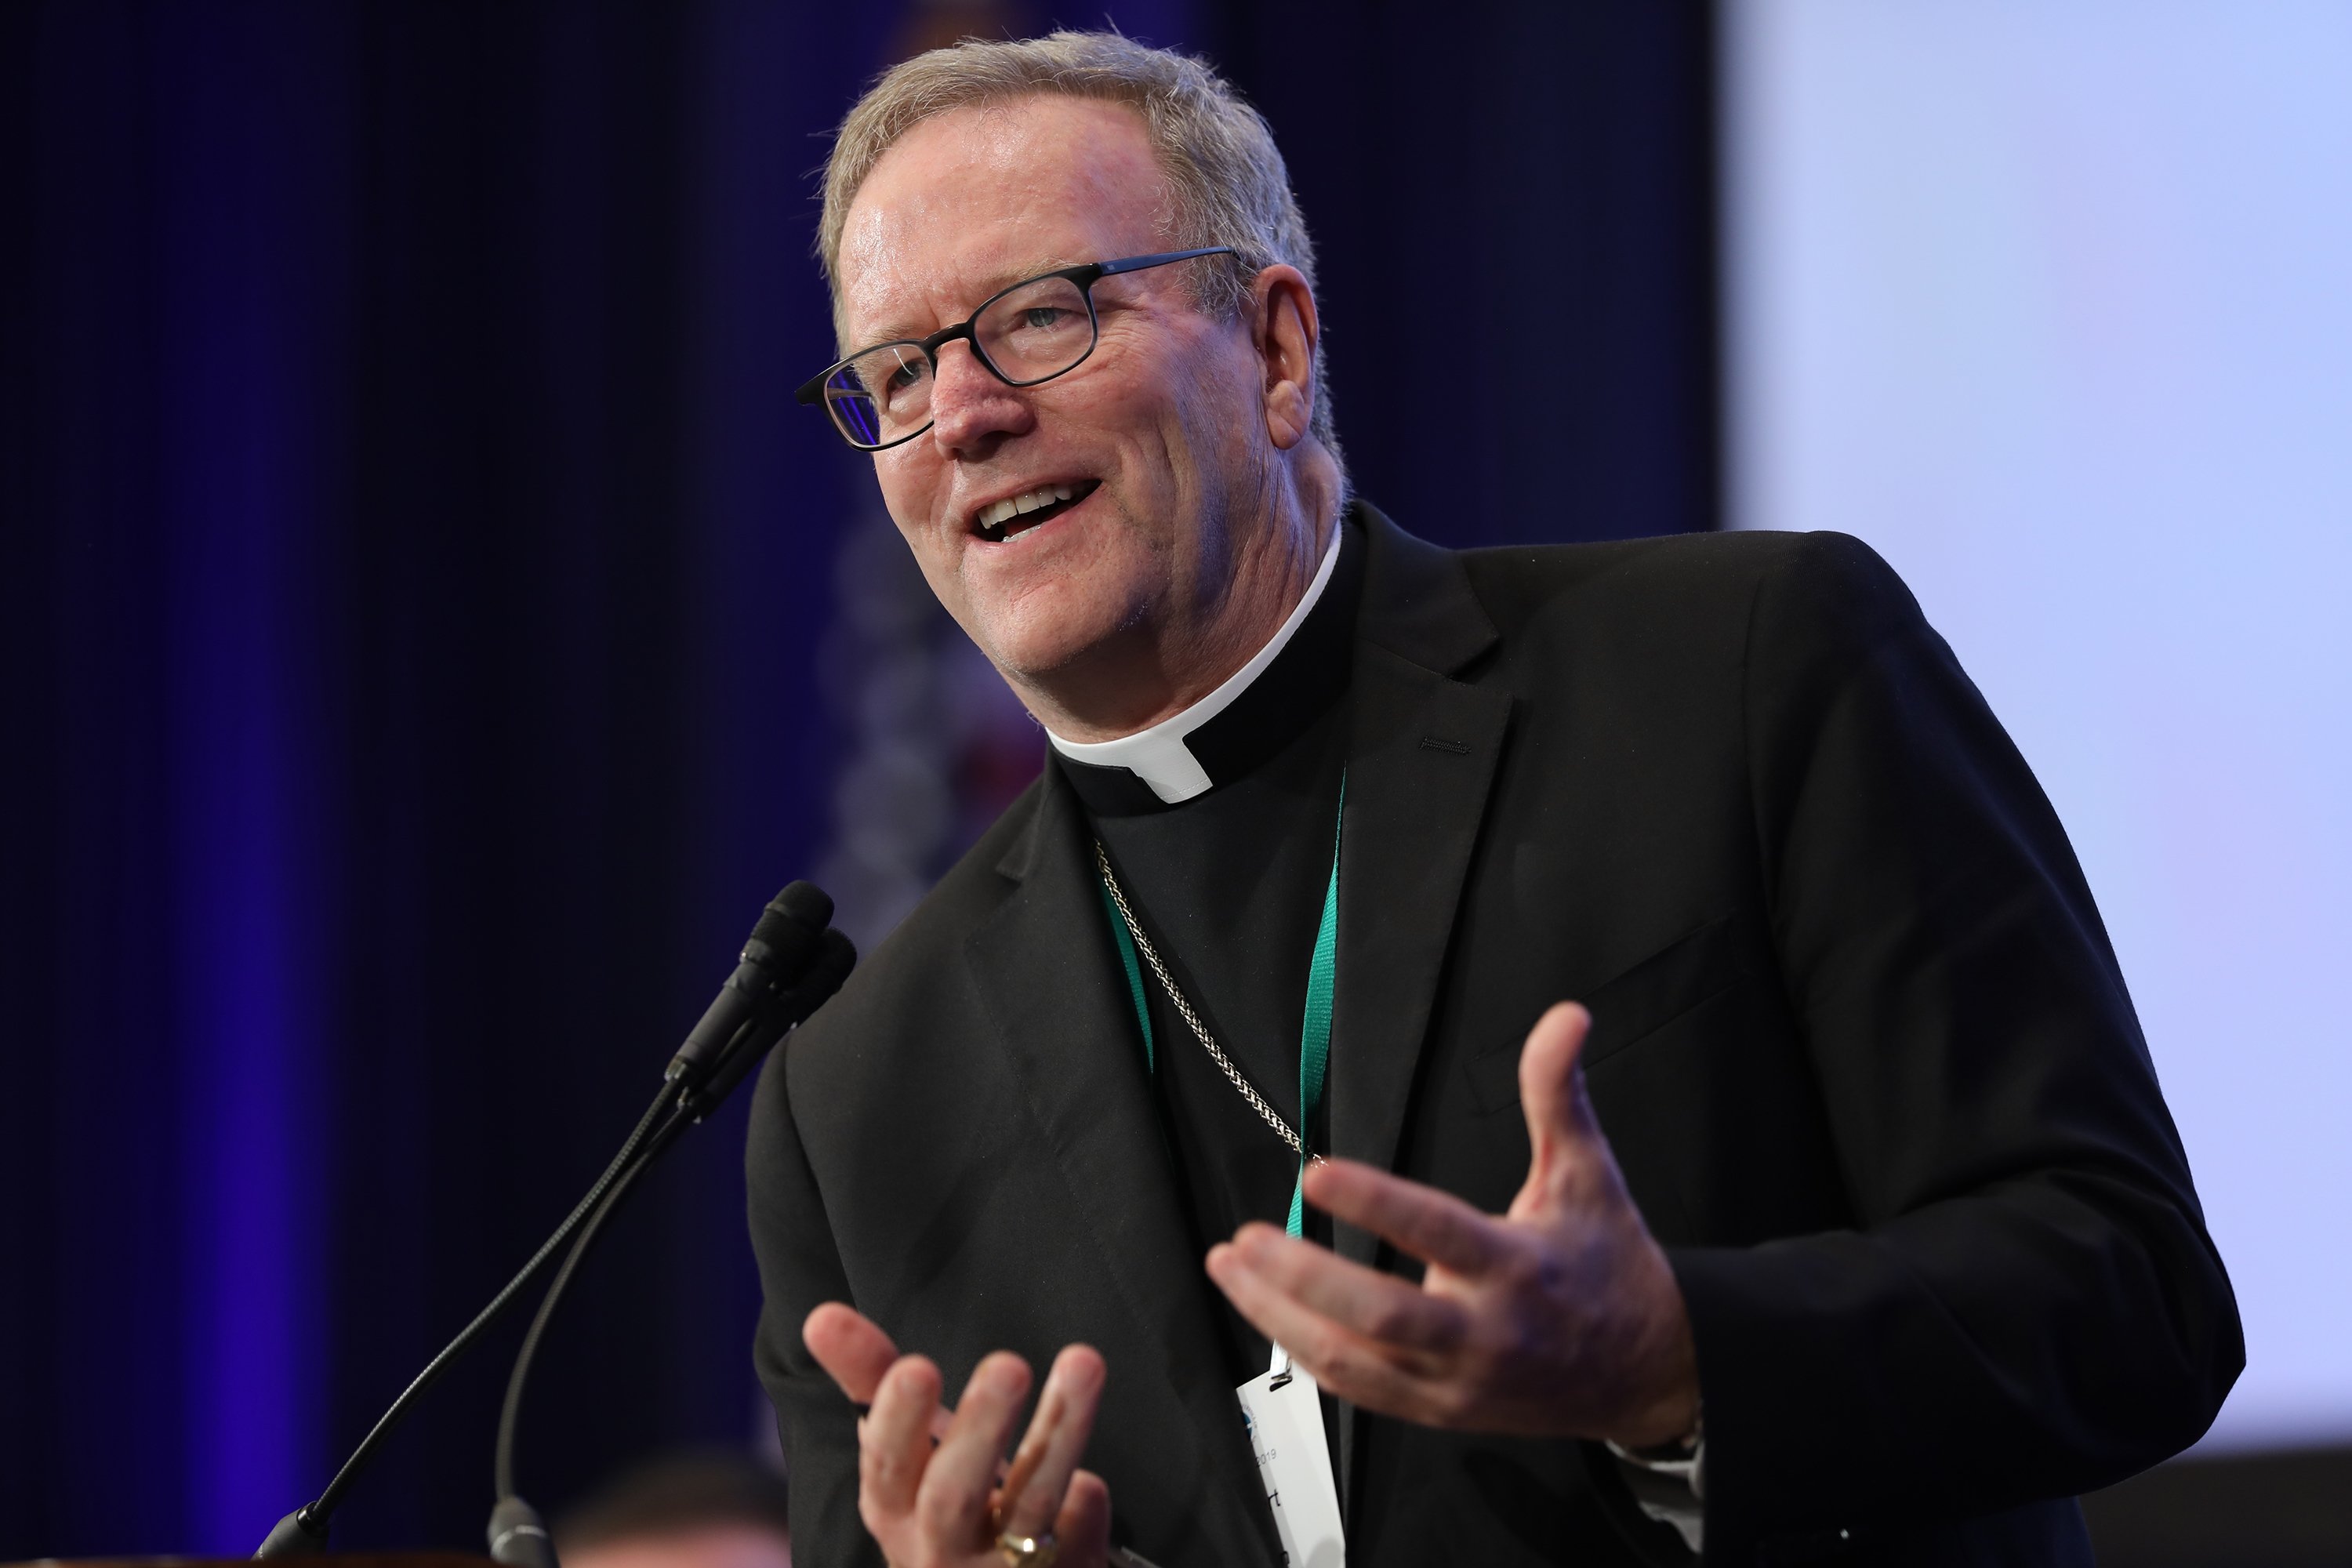 At the 2019 USCCB General Assembly, then Los Angeles Auxiliary Bishop Robert E. Barron suggested Jordan Peterson's message might bring religiously unaffiliated, or "nones," particularly young people, back to the Catholic Church. (CNS/Bob Roller)